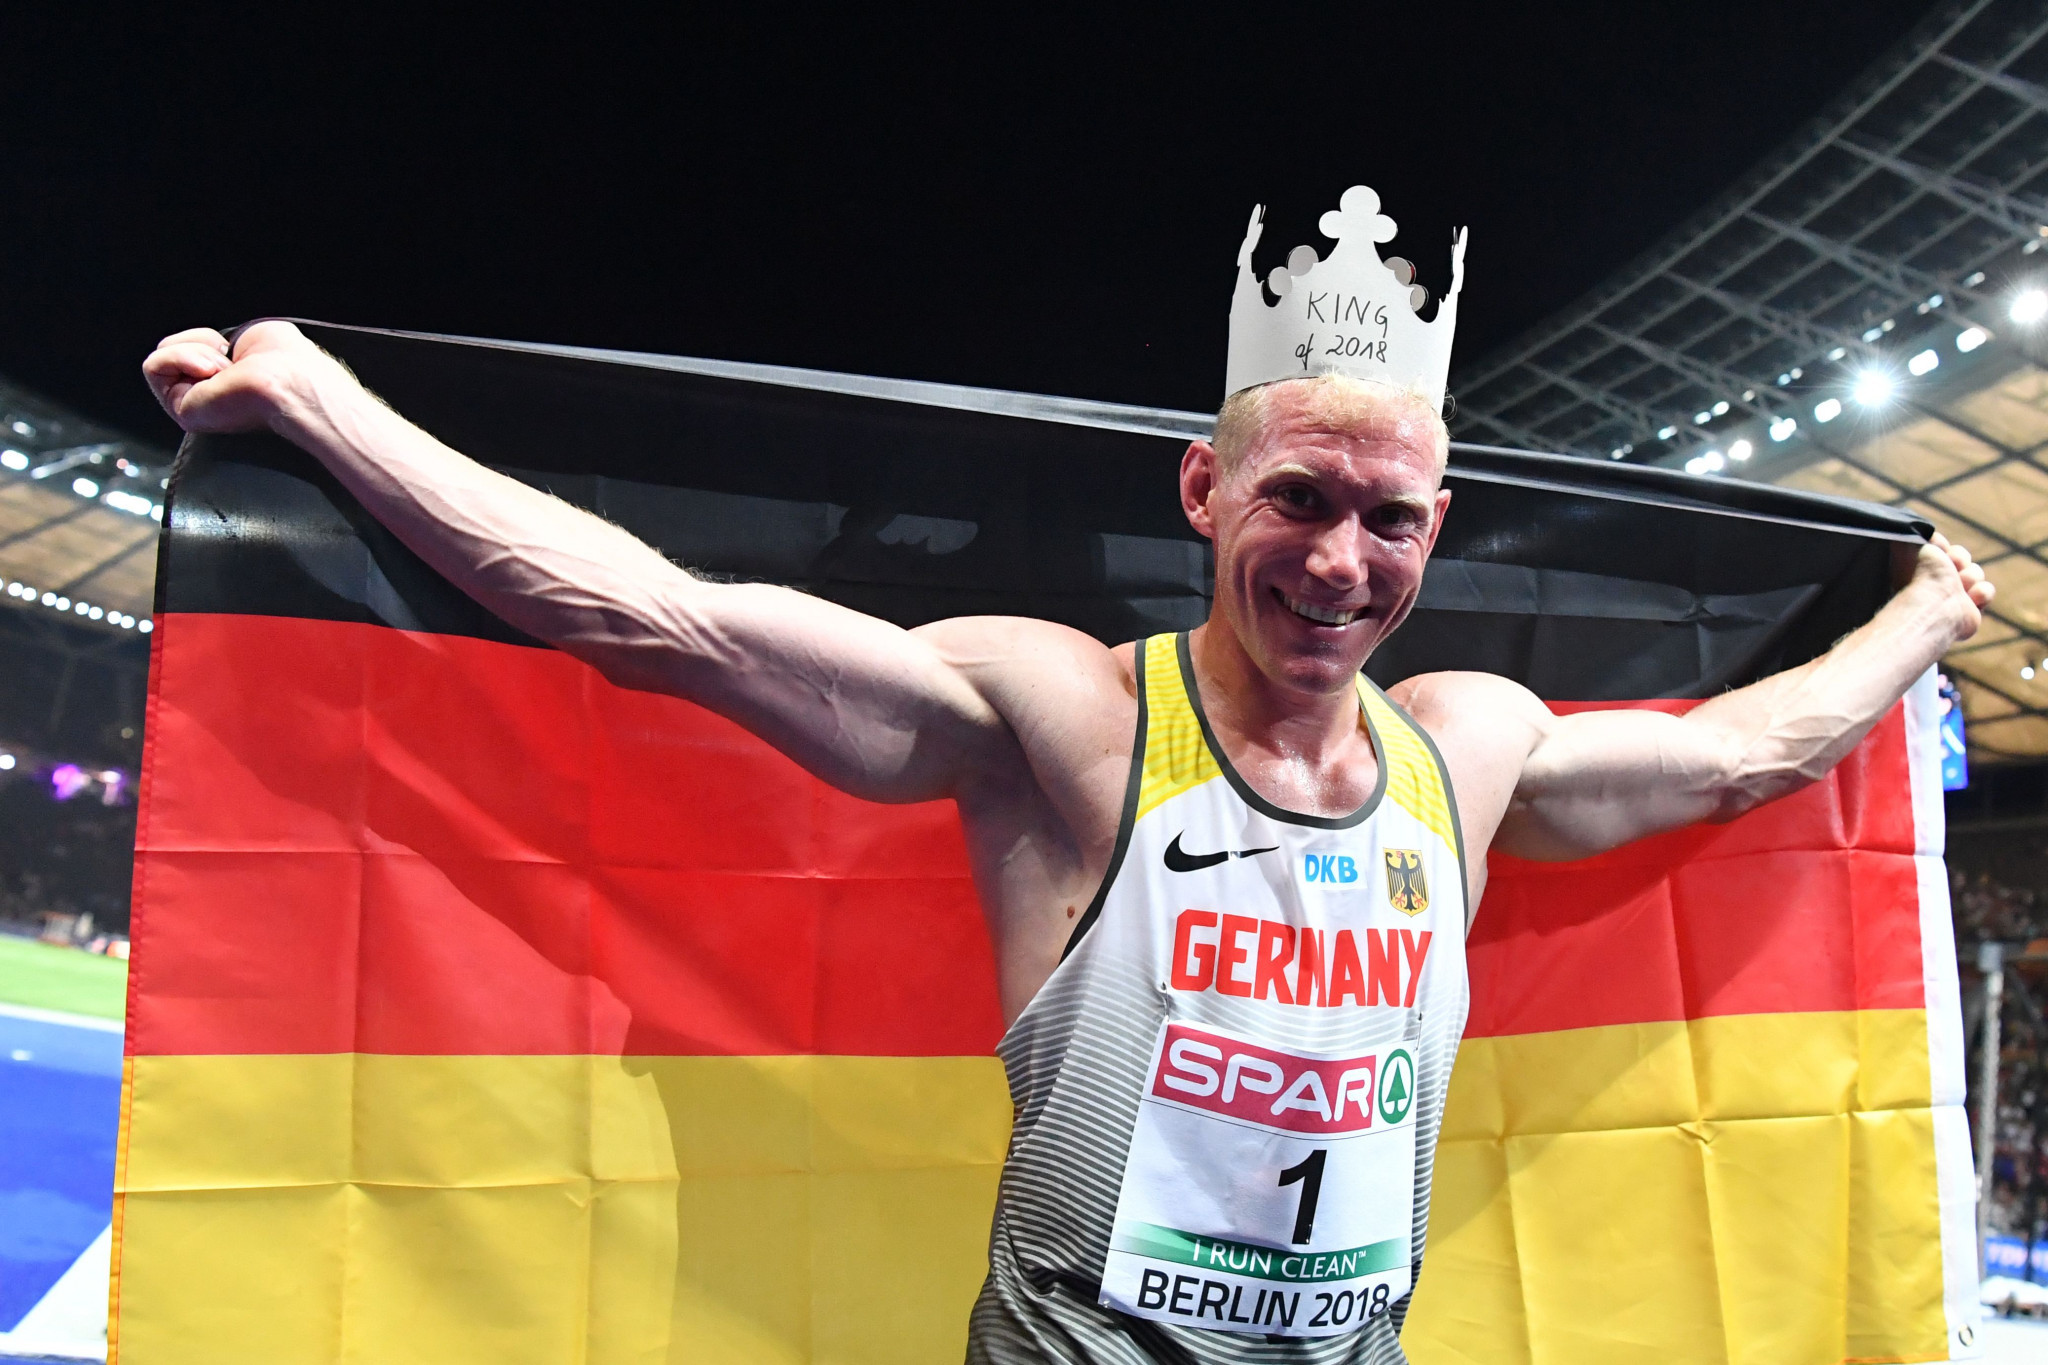 Germany's Arthur Abele won home decathlon gold in Berlin ©Getty Images